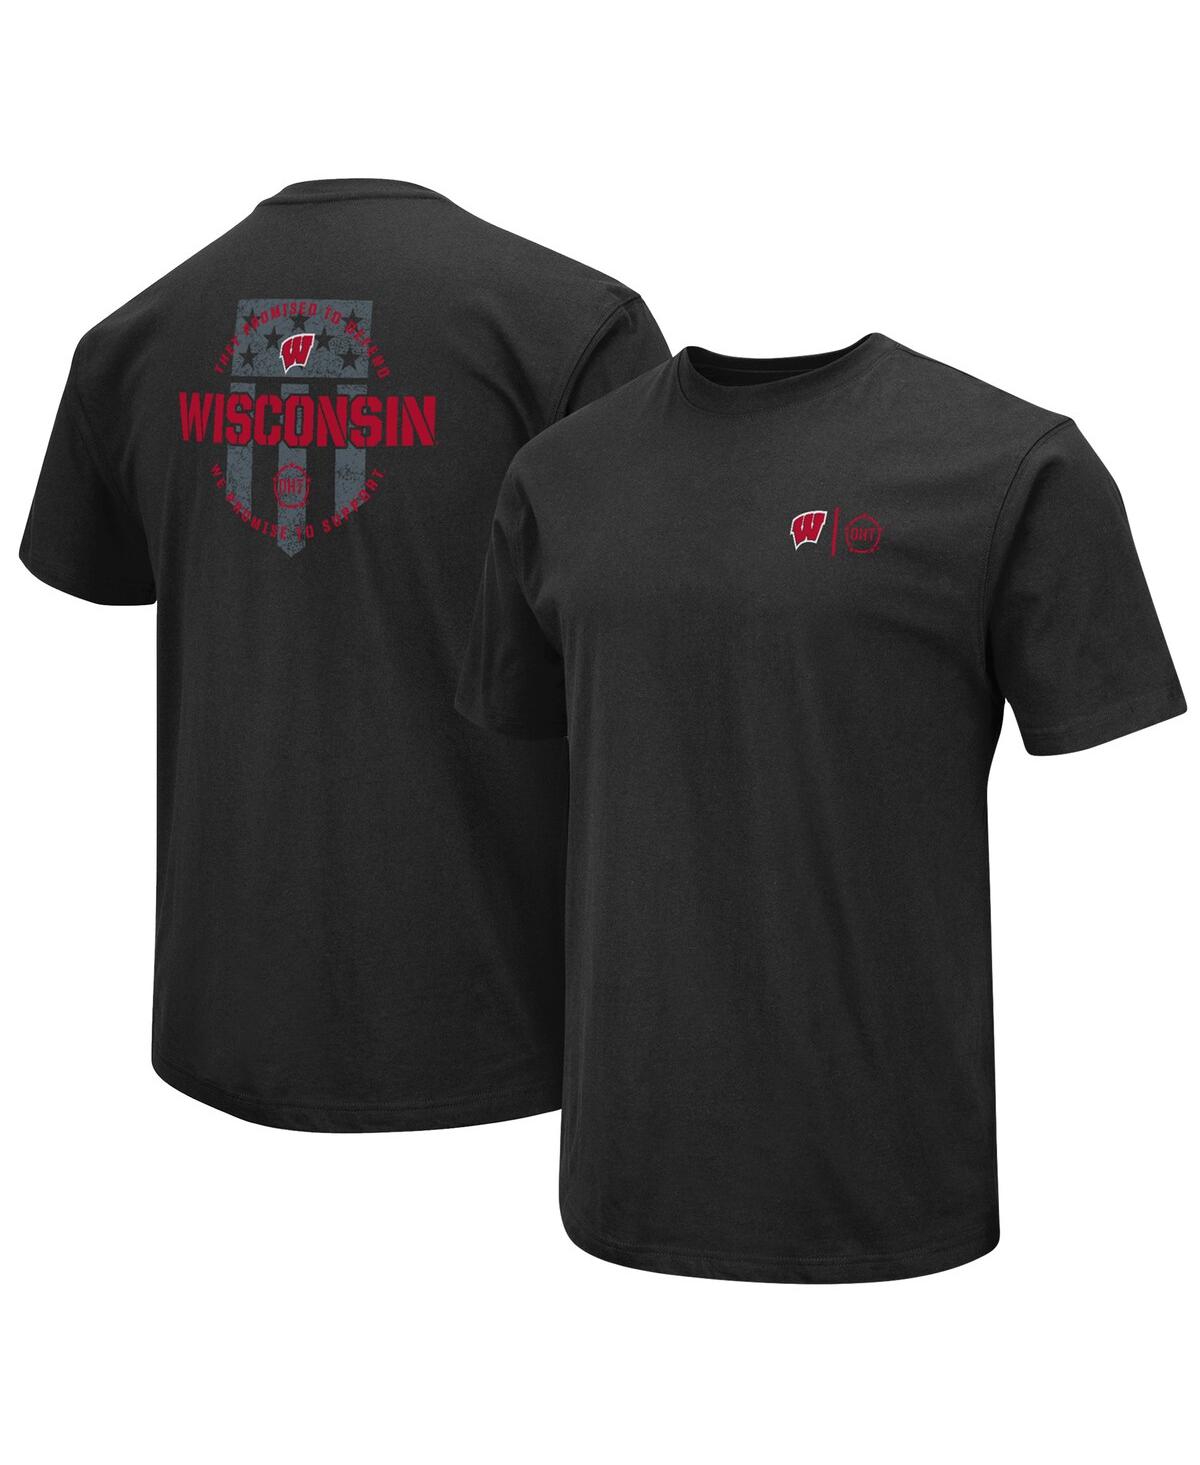 Colosseum Men's  Black Wisconsin Badgers Oht Military-inspired Appreciation T-shirt